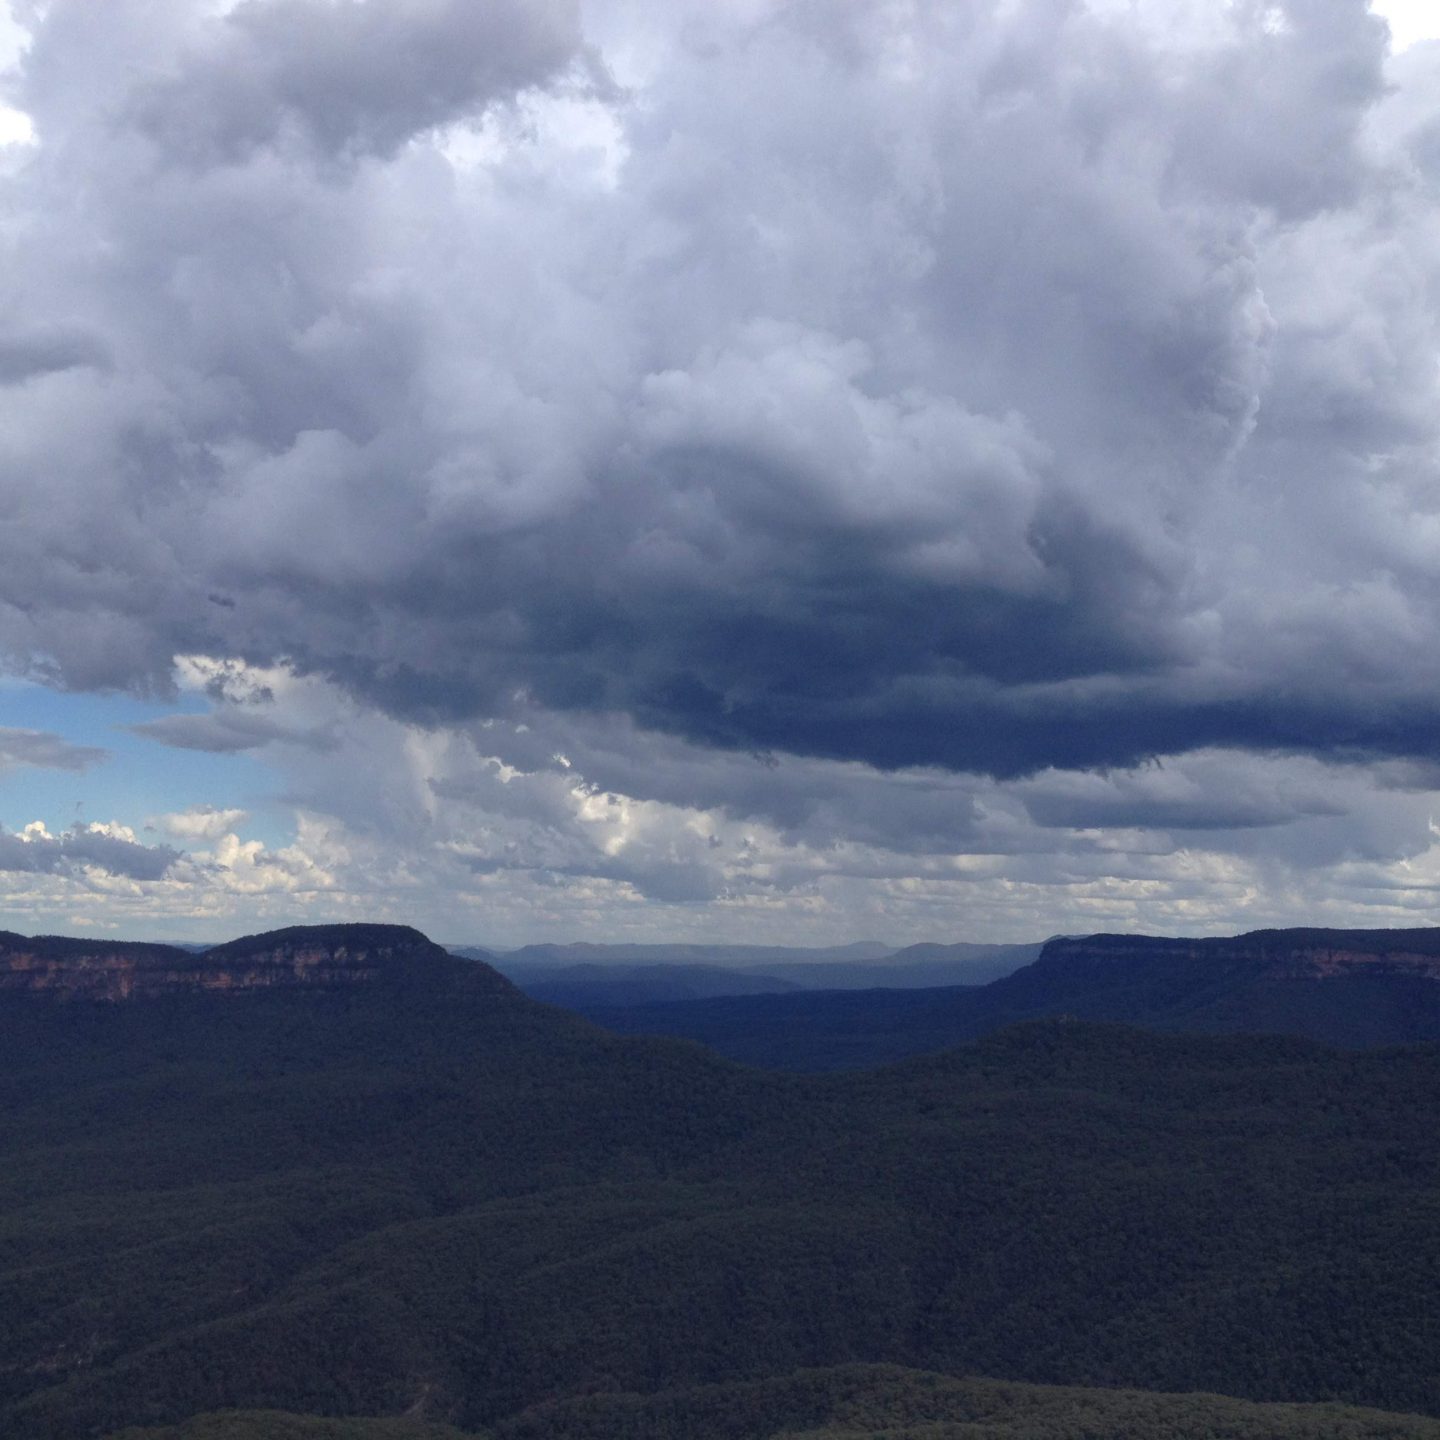 A storm brewing in Katoomba, New South Wales